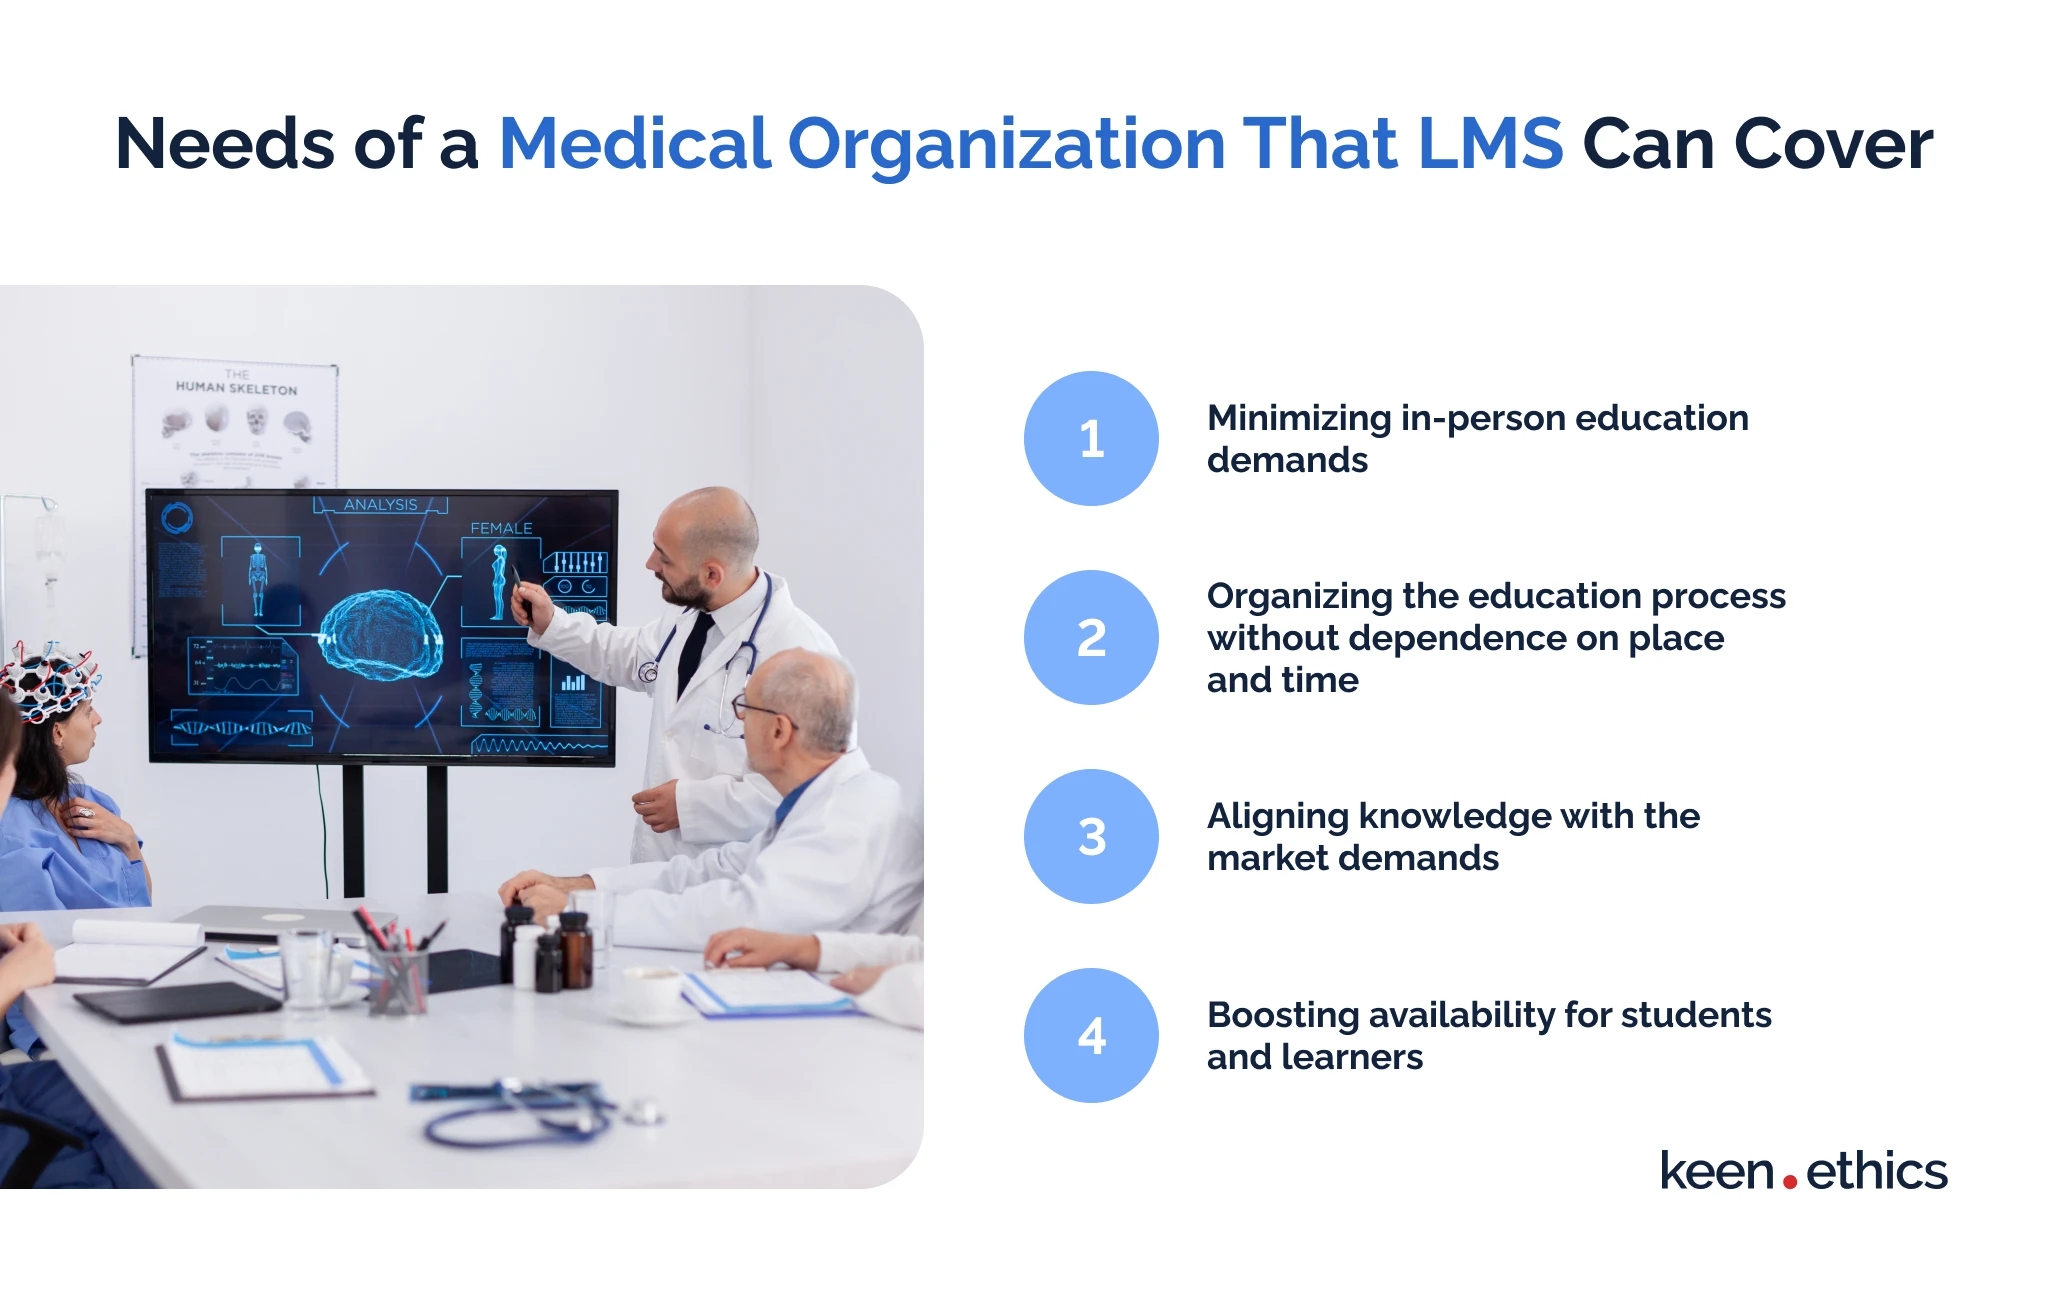 Needs of a medical organization that LMS can cover